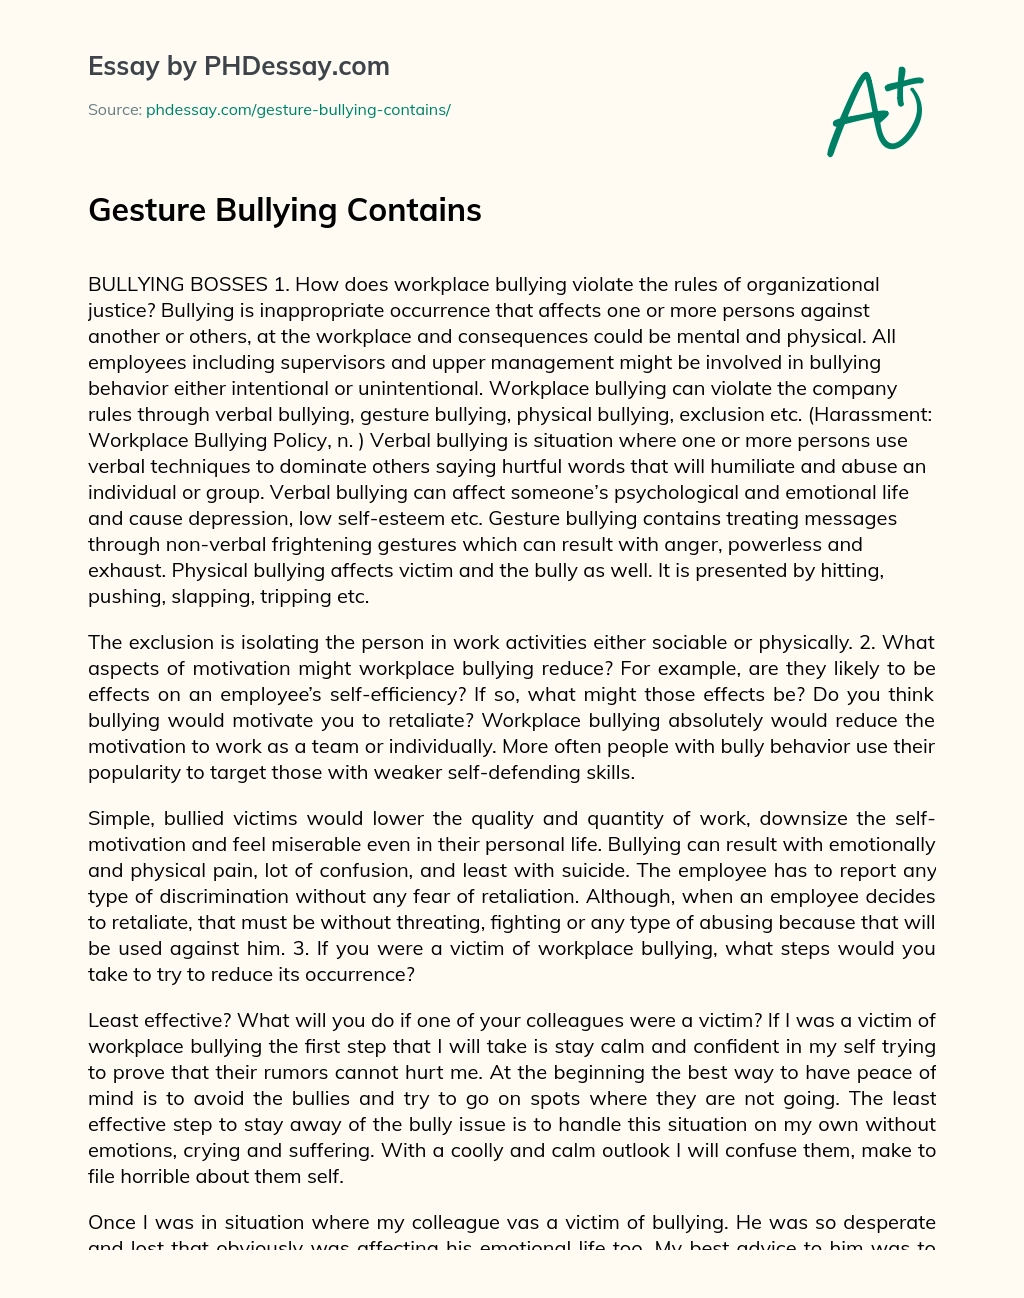 Gesture Bullying Contains essay